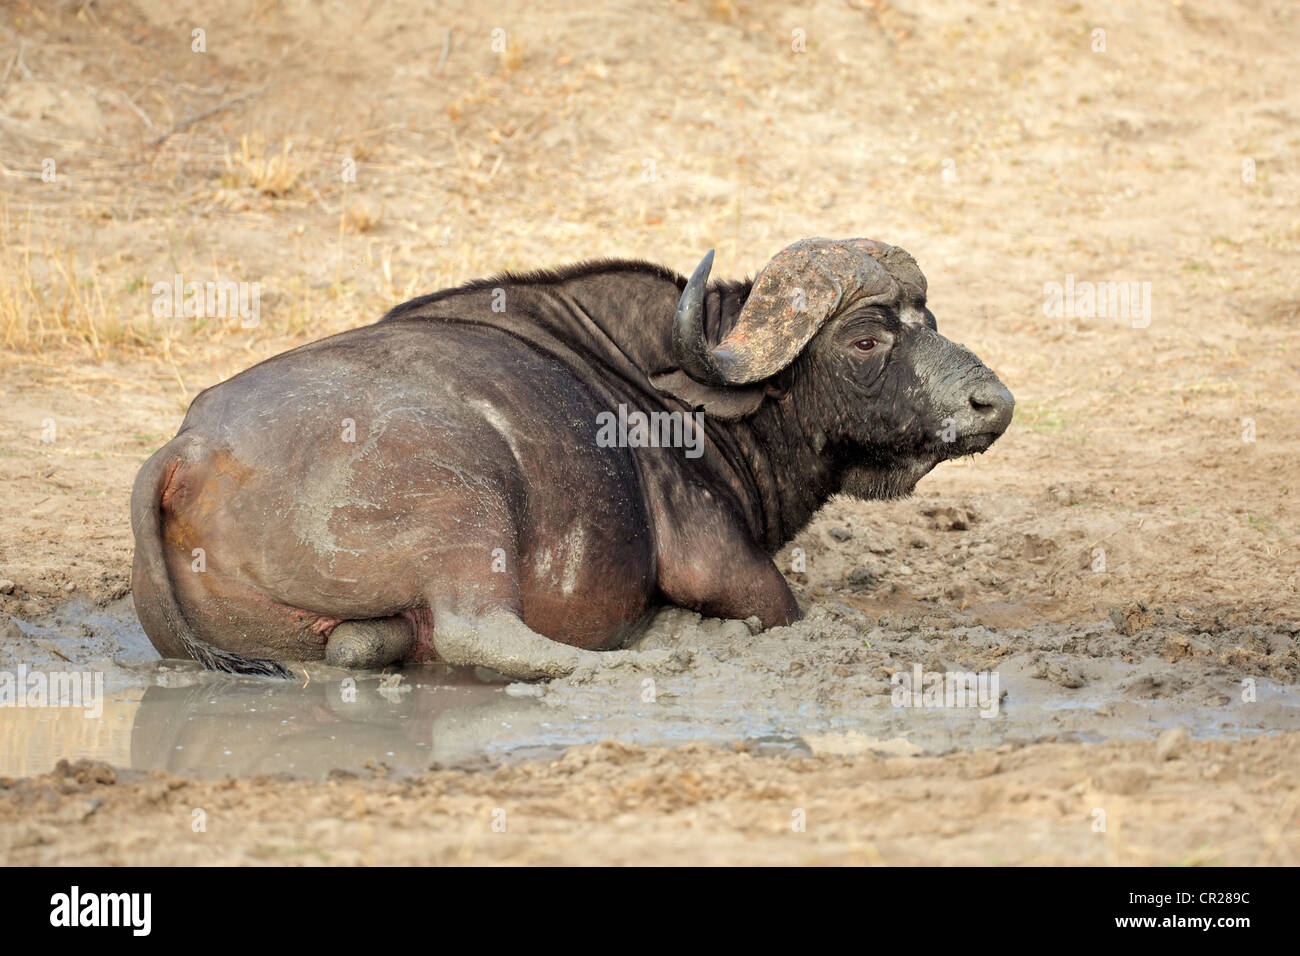 African or Cape buffalo bull (Syncerus caffer) taking a mud bath, South Africa Stock Photo